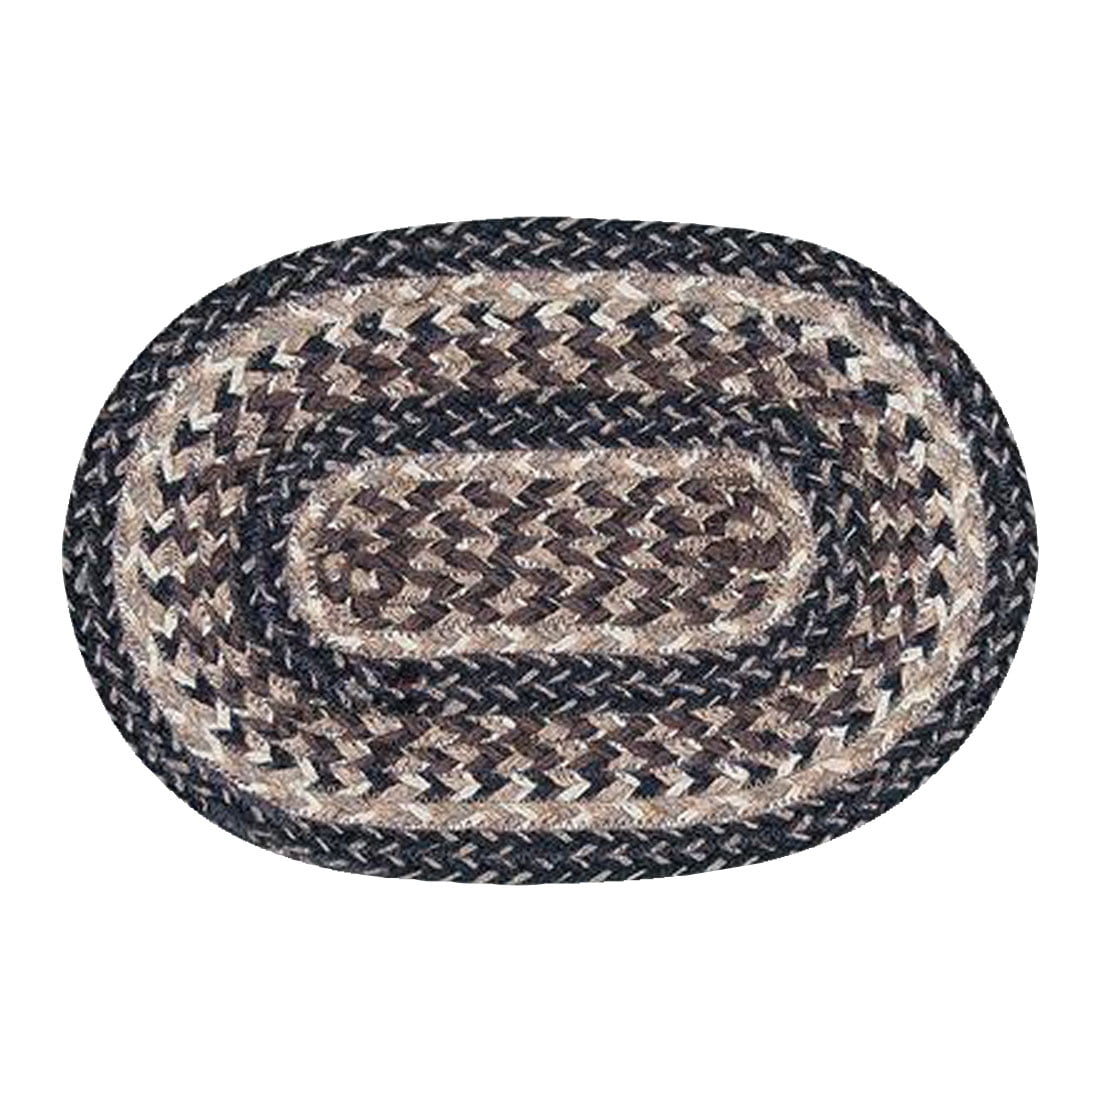 Capitol Importing 01-993 Black Plus Tan Miniature Swatch Oval Rug, 7.5 X 11 In.